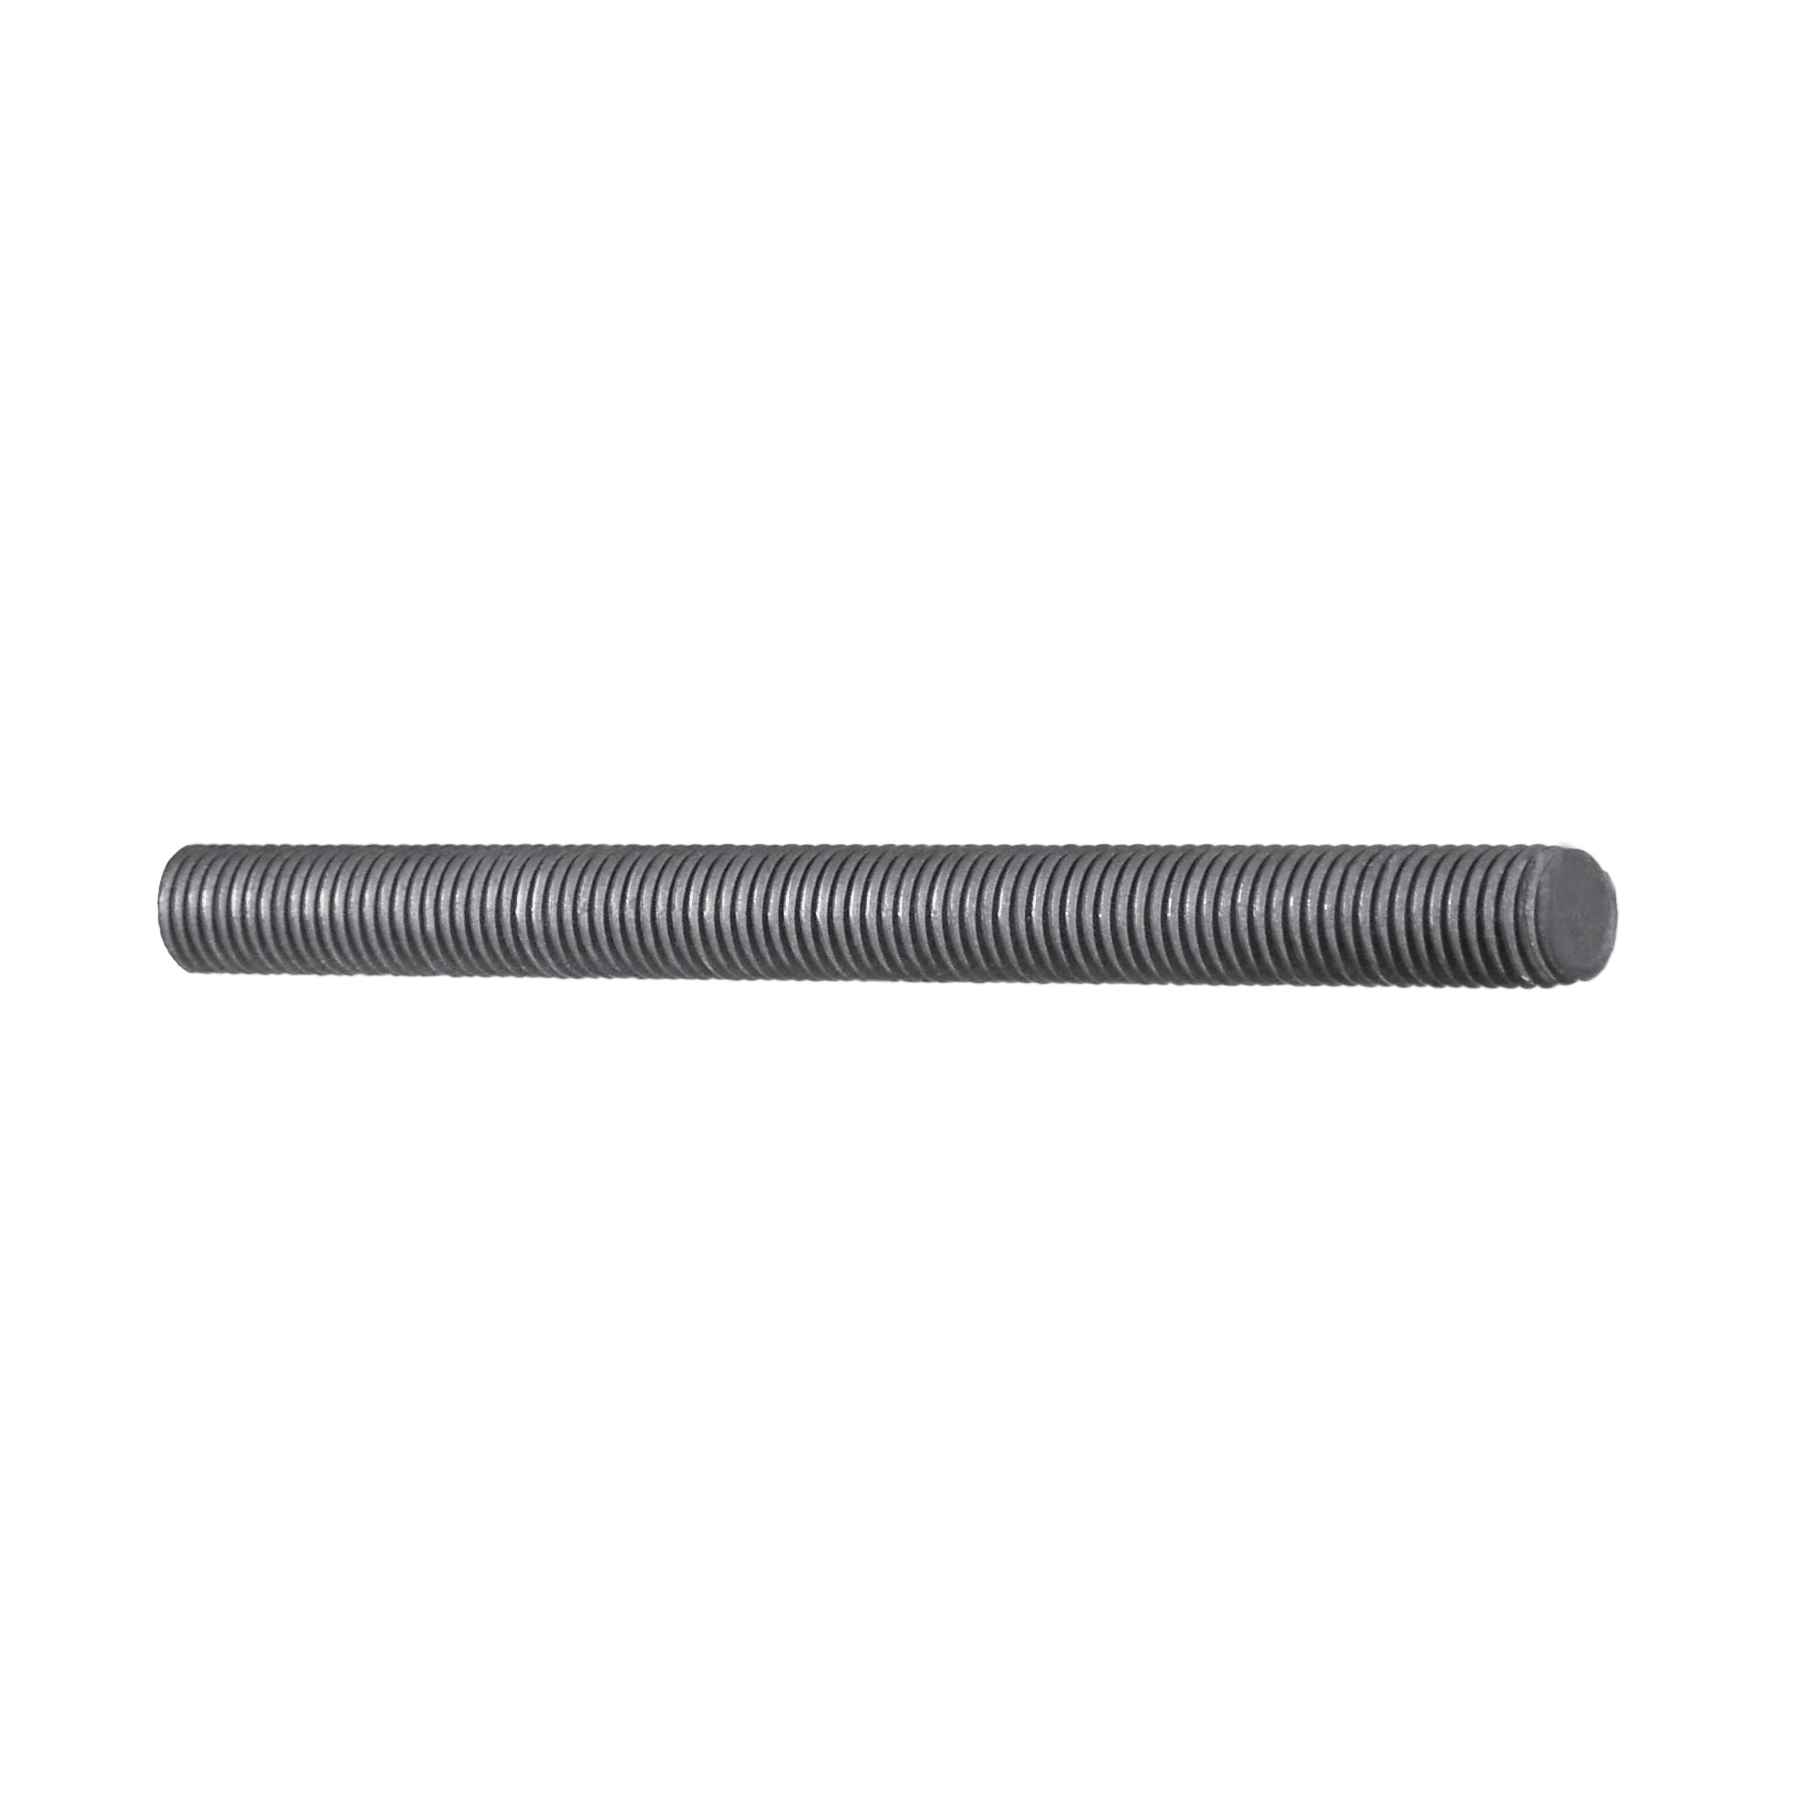 Anvil® 0500330527 FIG 146 Continuous Threaded Rod, 1/2-13, 10 ft OAL, Carbon Steel, Zinc Plated